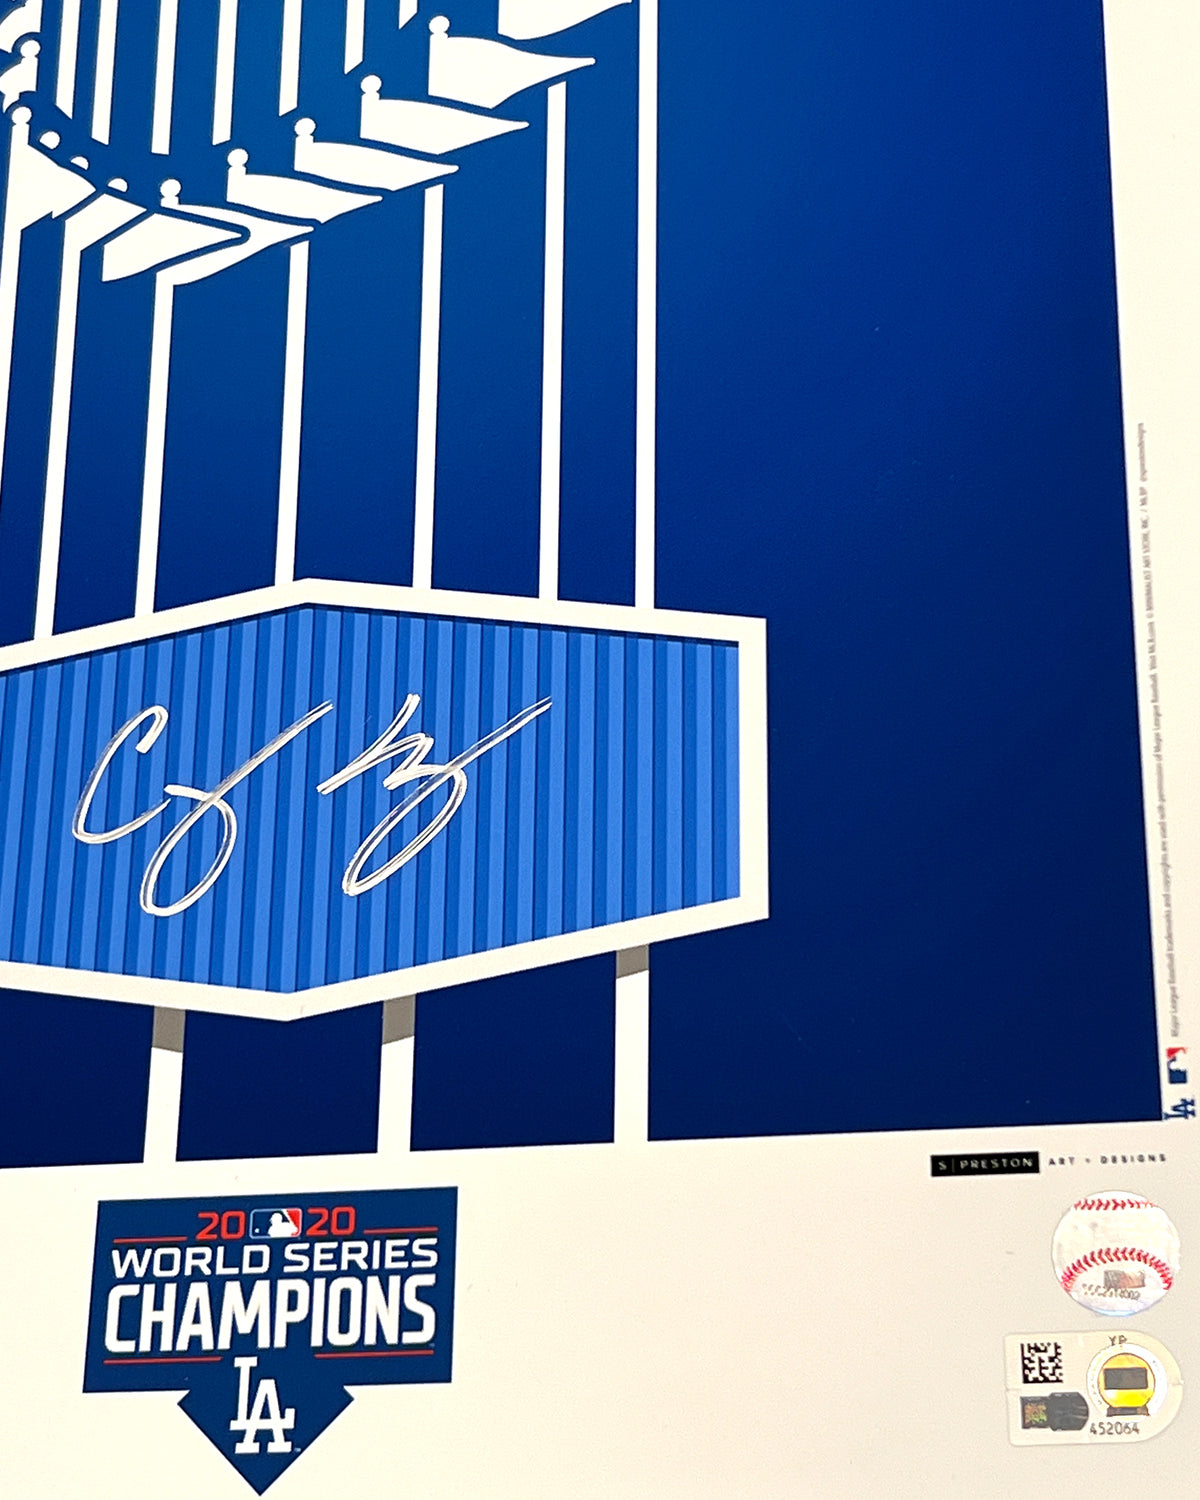 Minimalist World Series 2020 Poster Print - Corey Seager Signed - MLB Authenticated